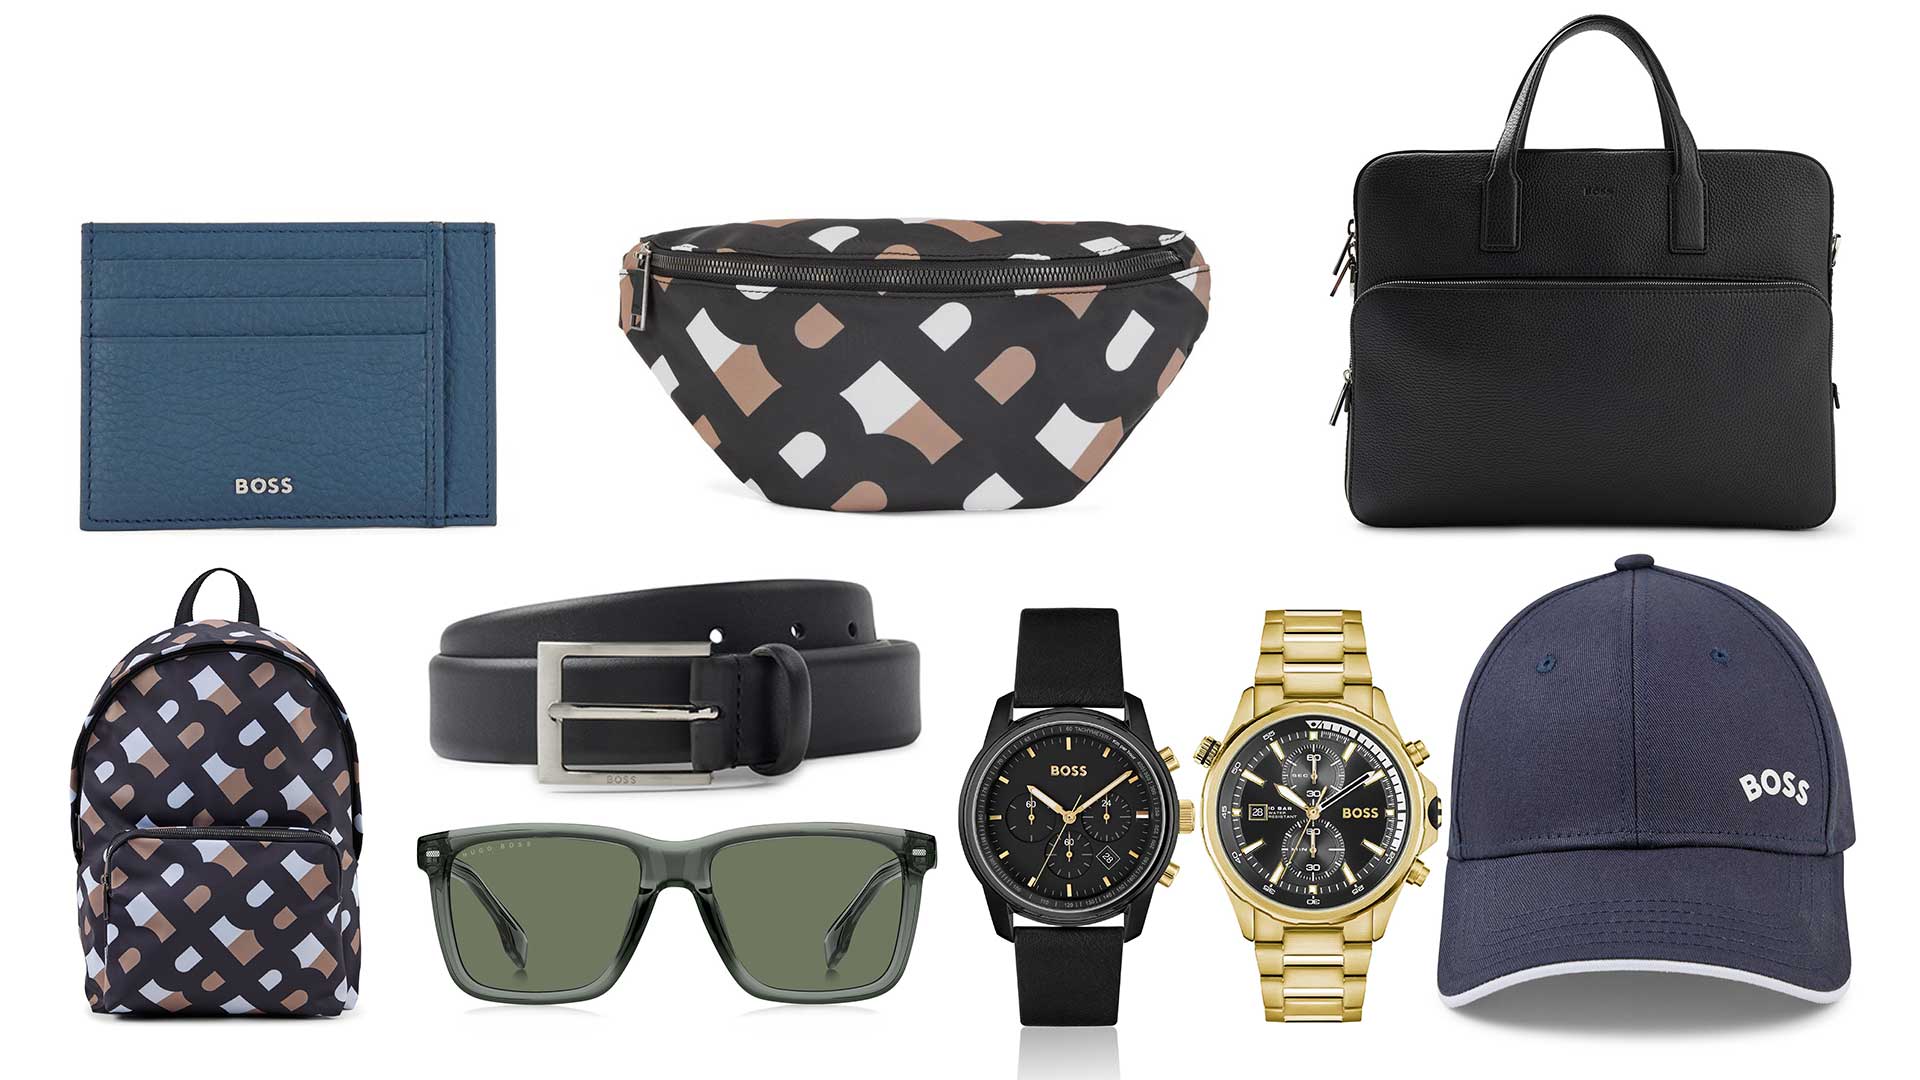 Become the Boss with this Style Gift Guide